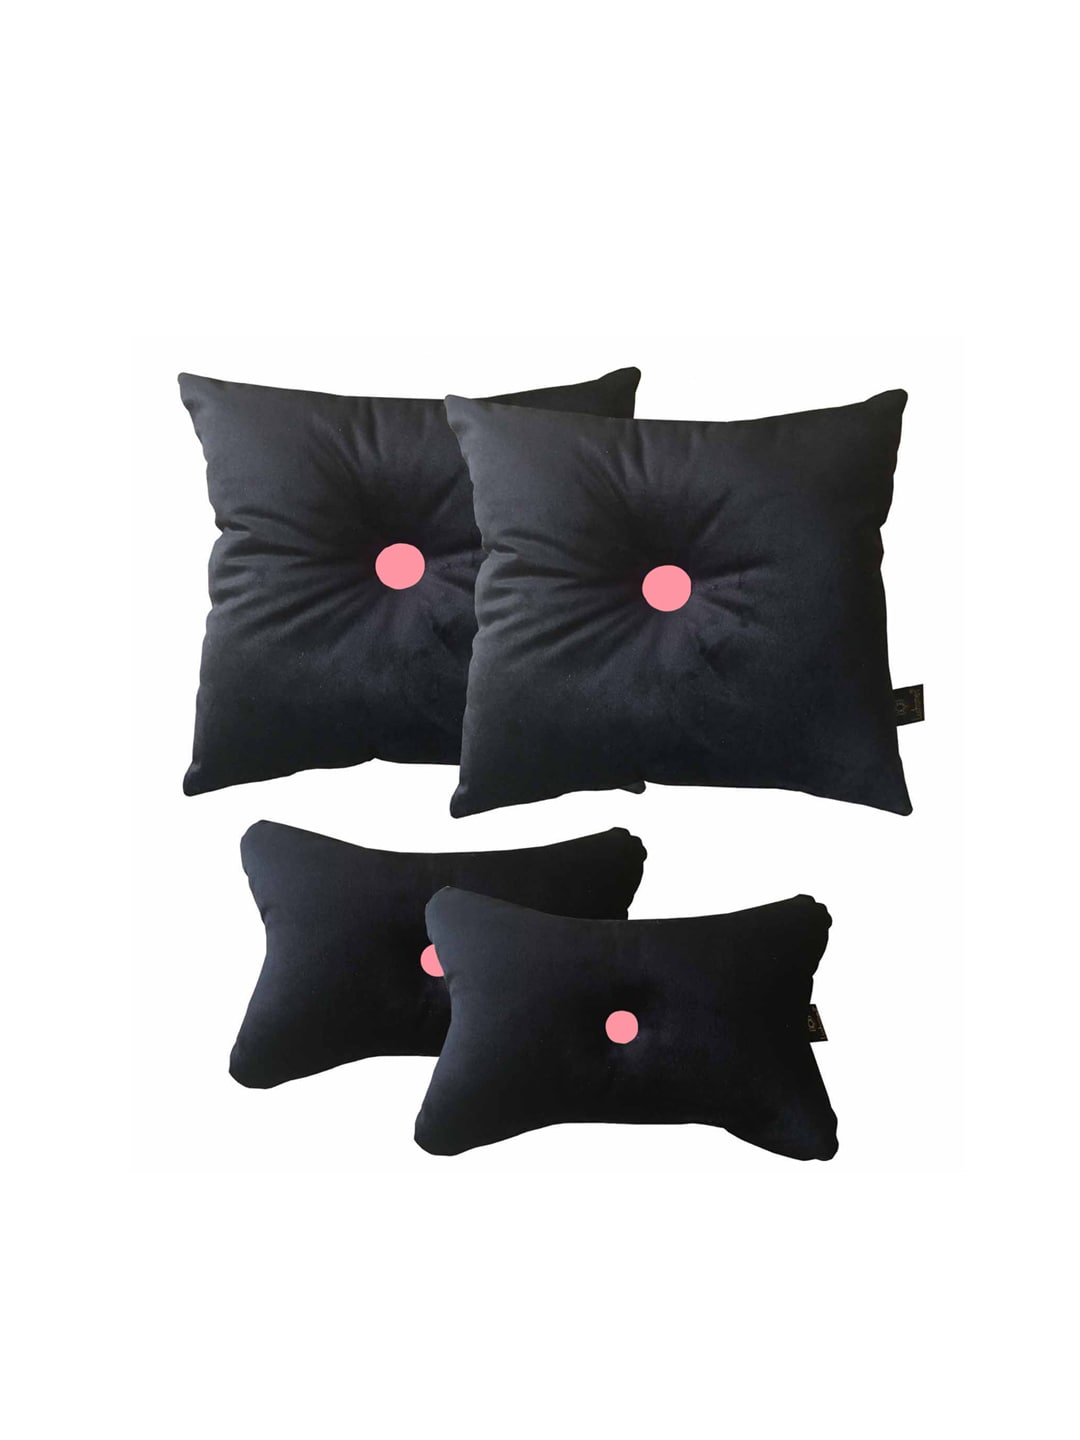 Lushomes Set of 4 Black & Pink Car Cushion Neck Rest Pillow with Button Price in India